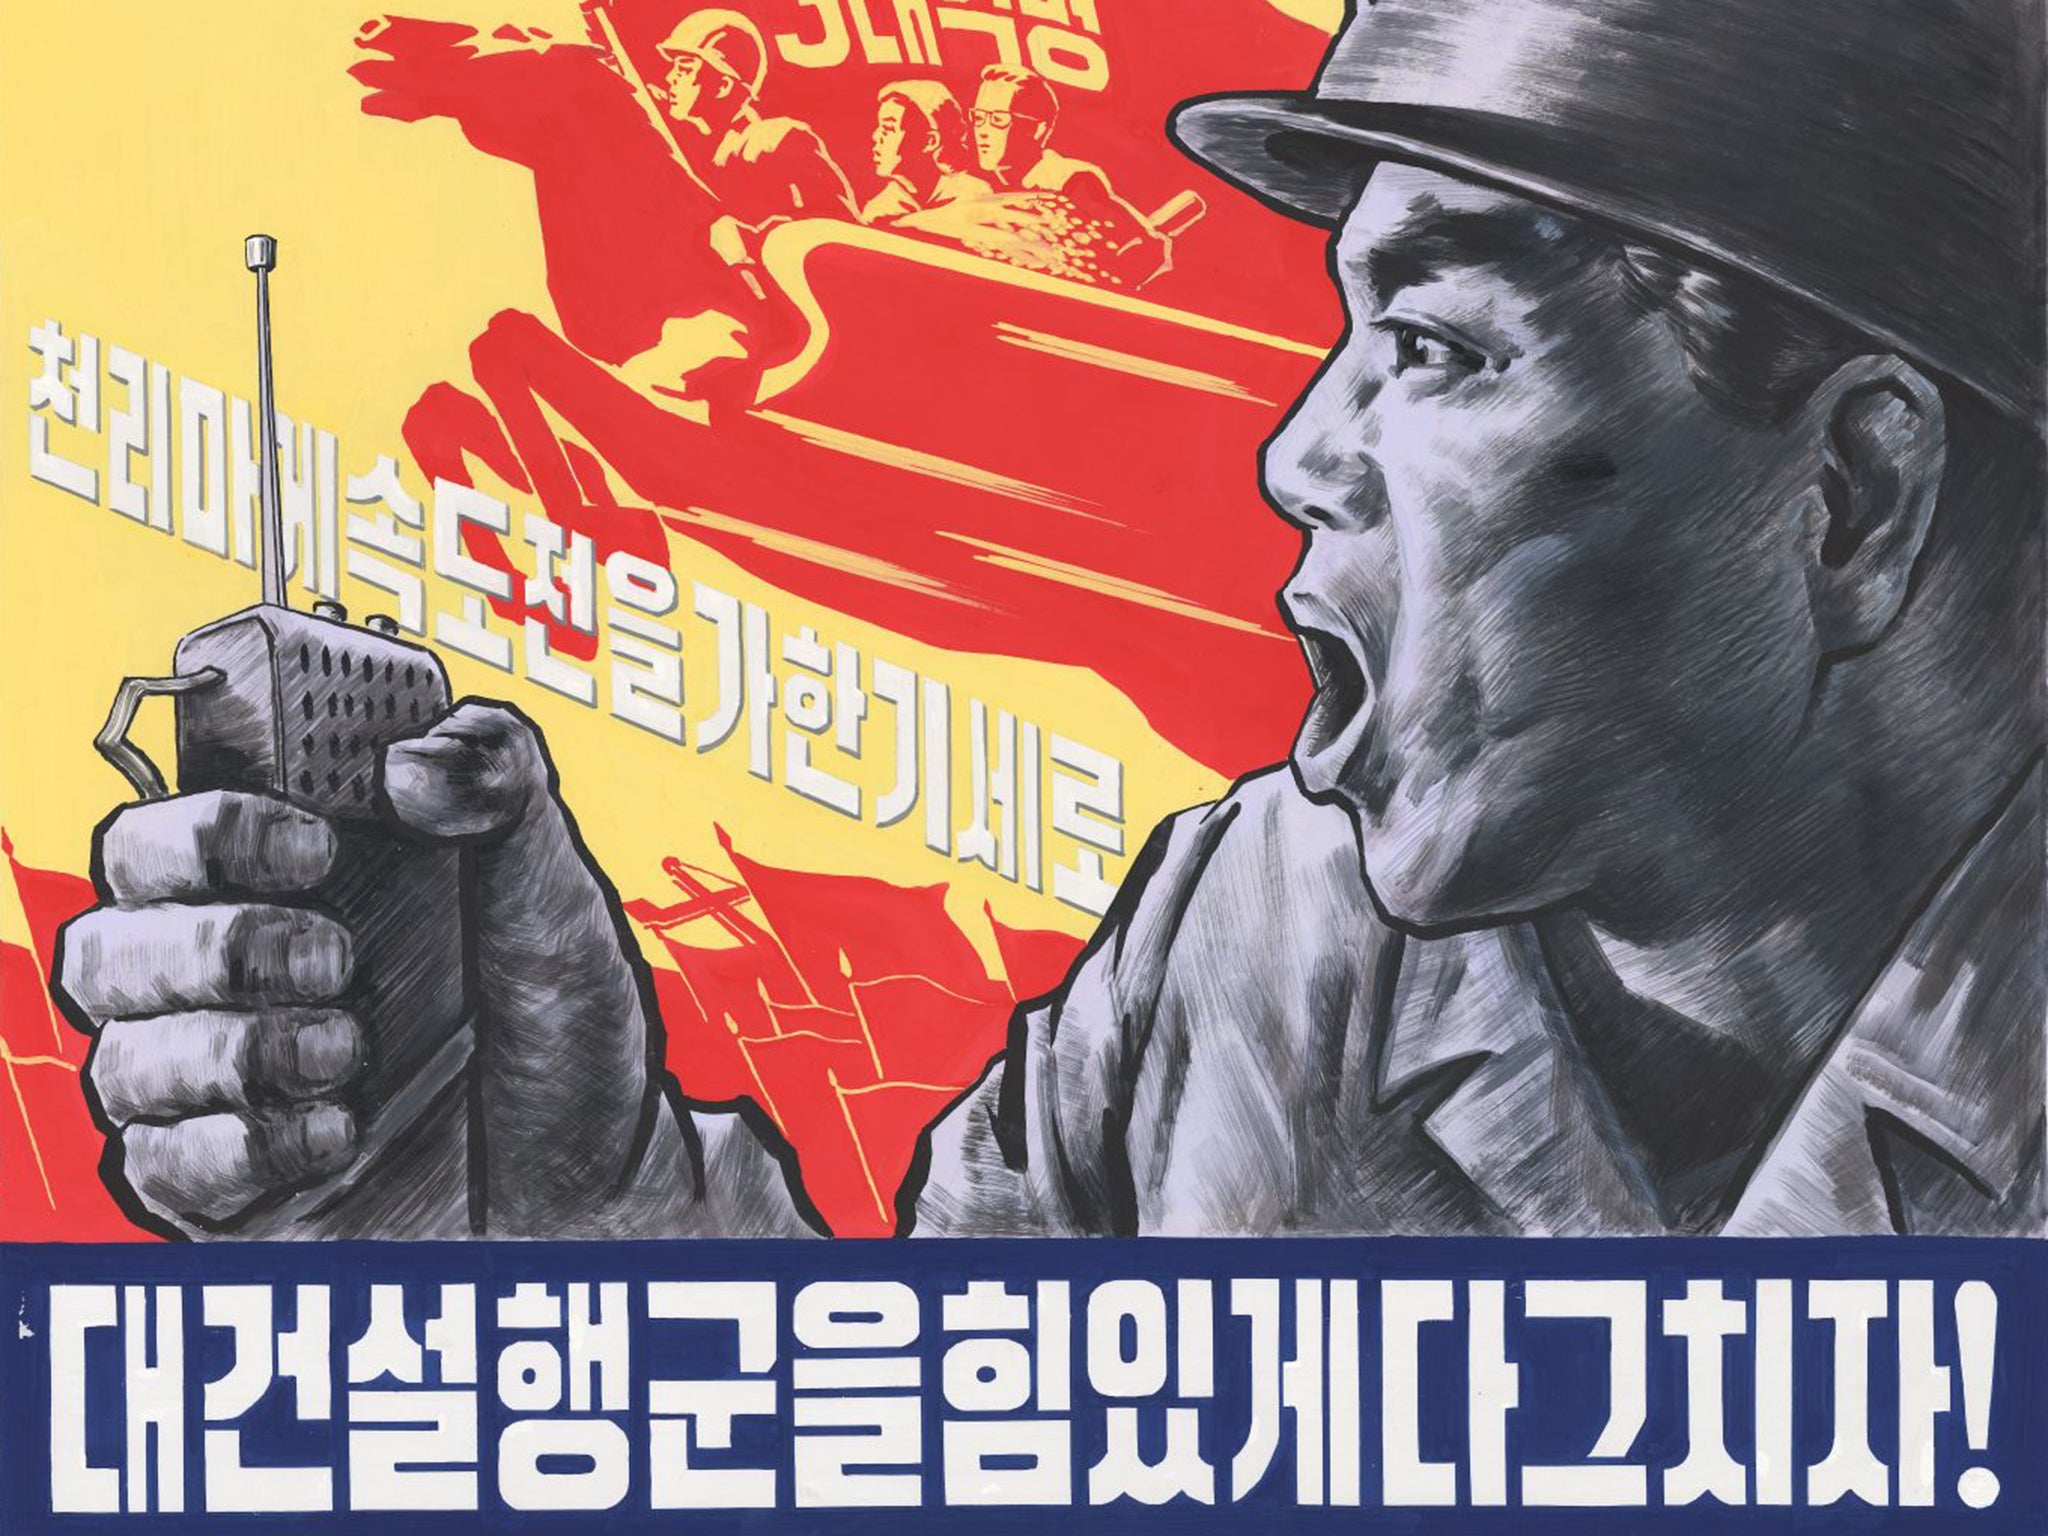 One of the Pyongyang posters, the slogan of which reads: ‘Let the exploits of the northern railway conductors shine!’